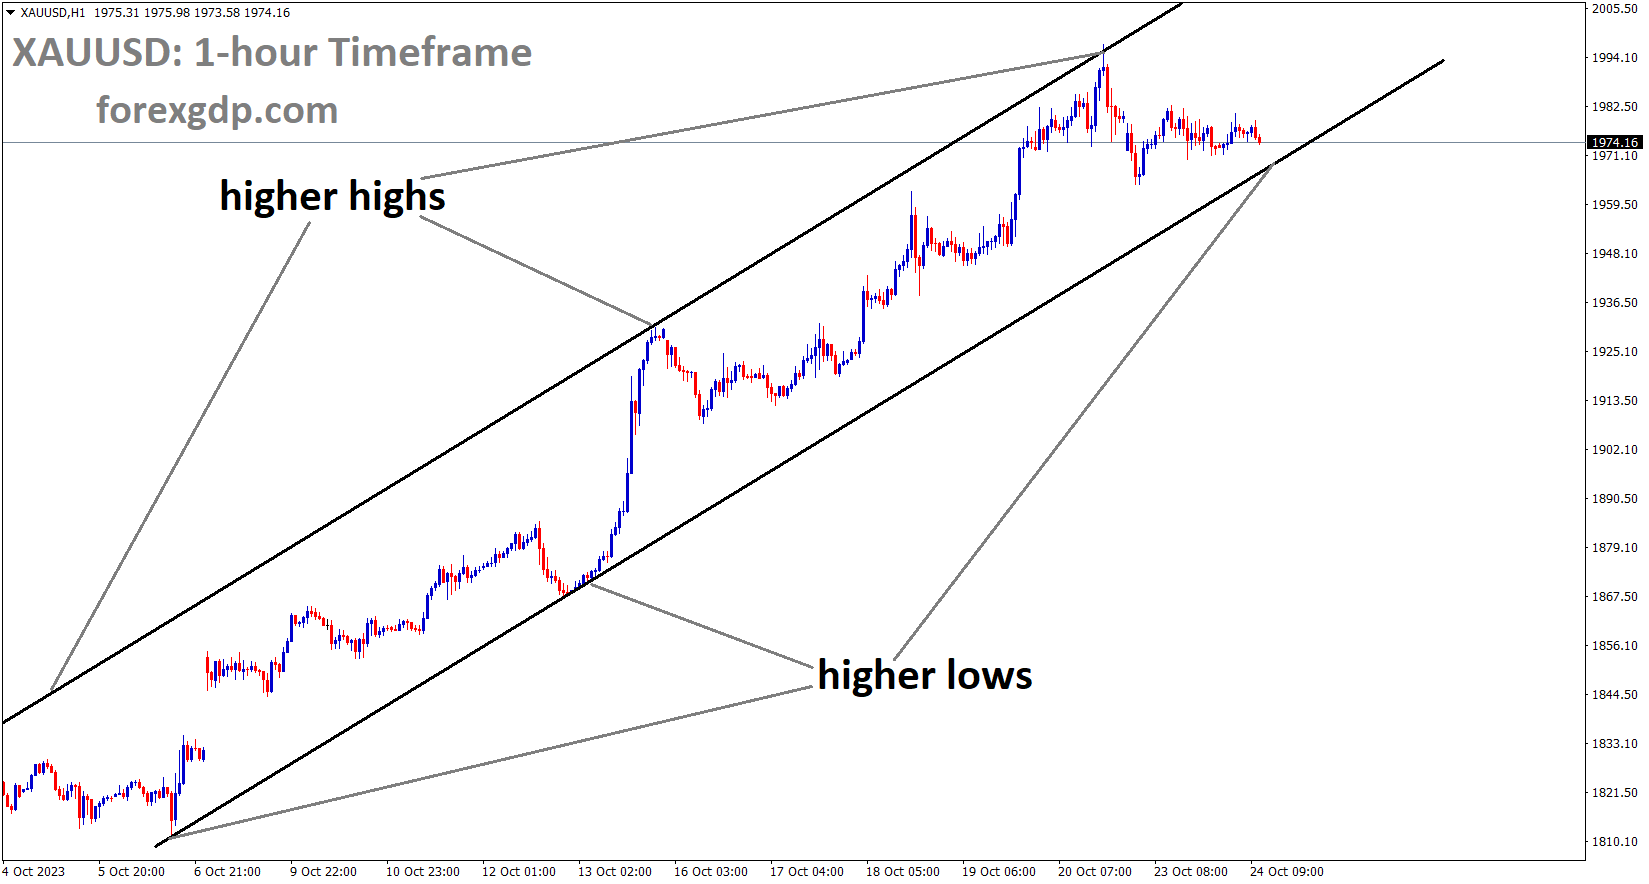 XAUUSD Gold price is moving in an Ascending channel and the market has reached the higher low area of the channel